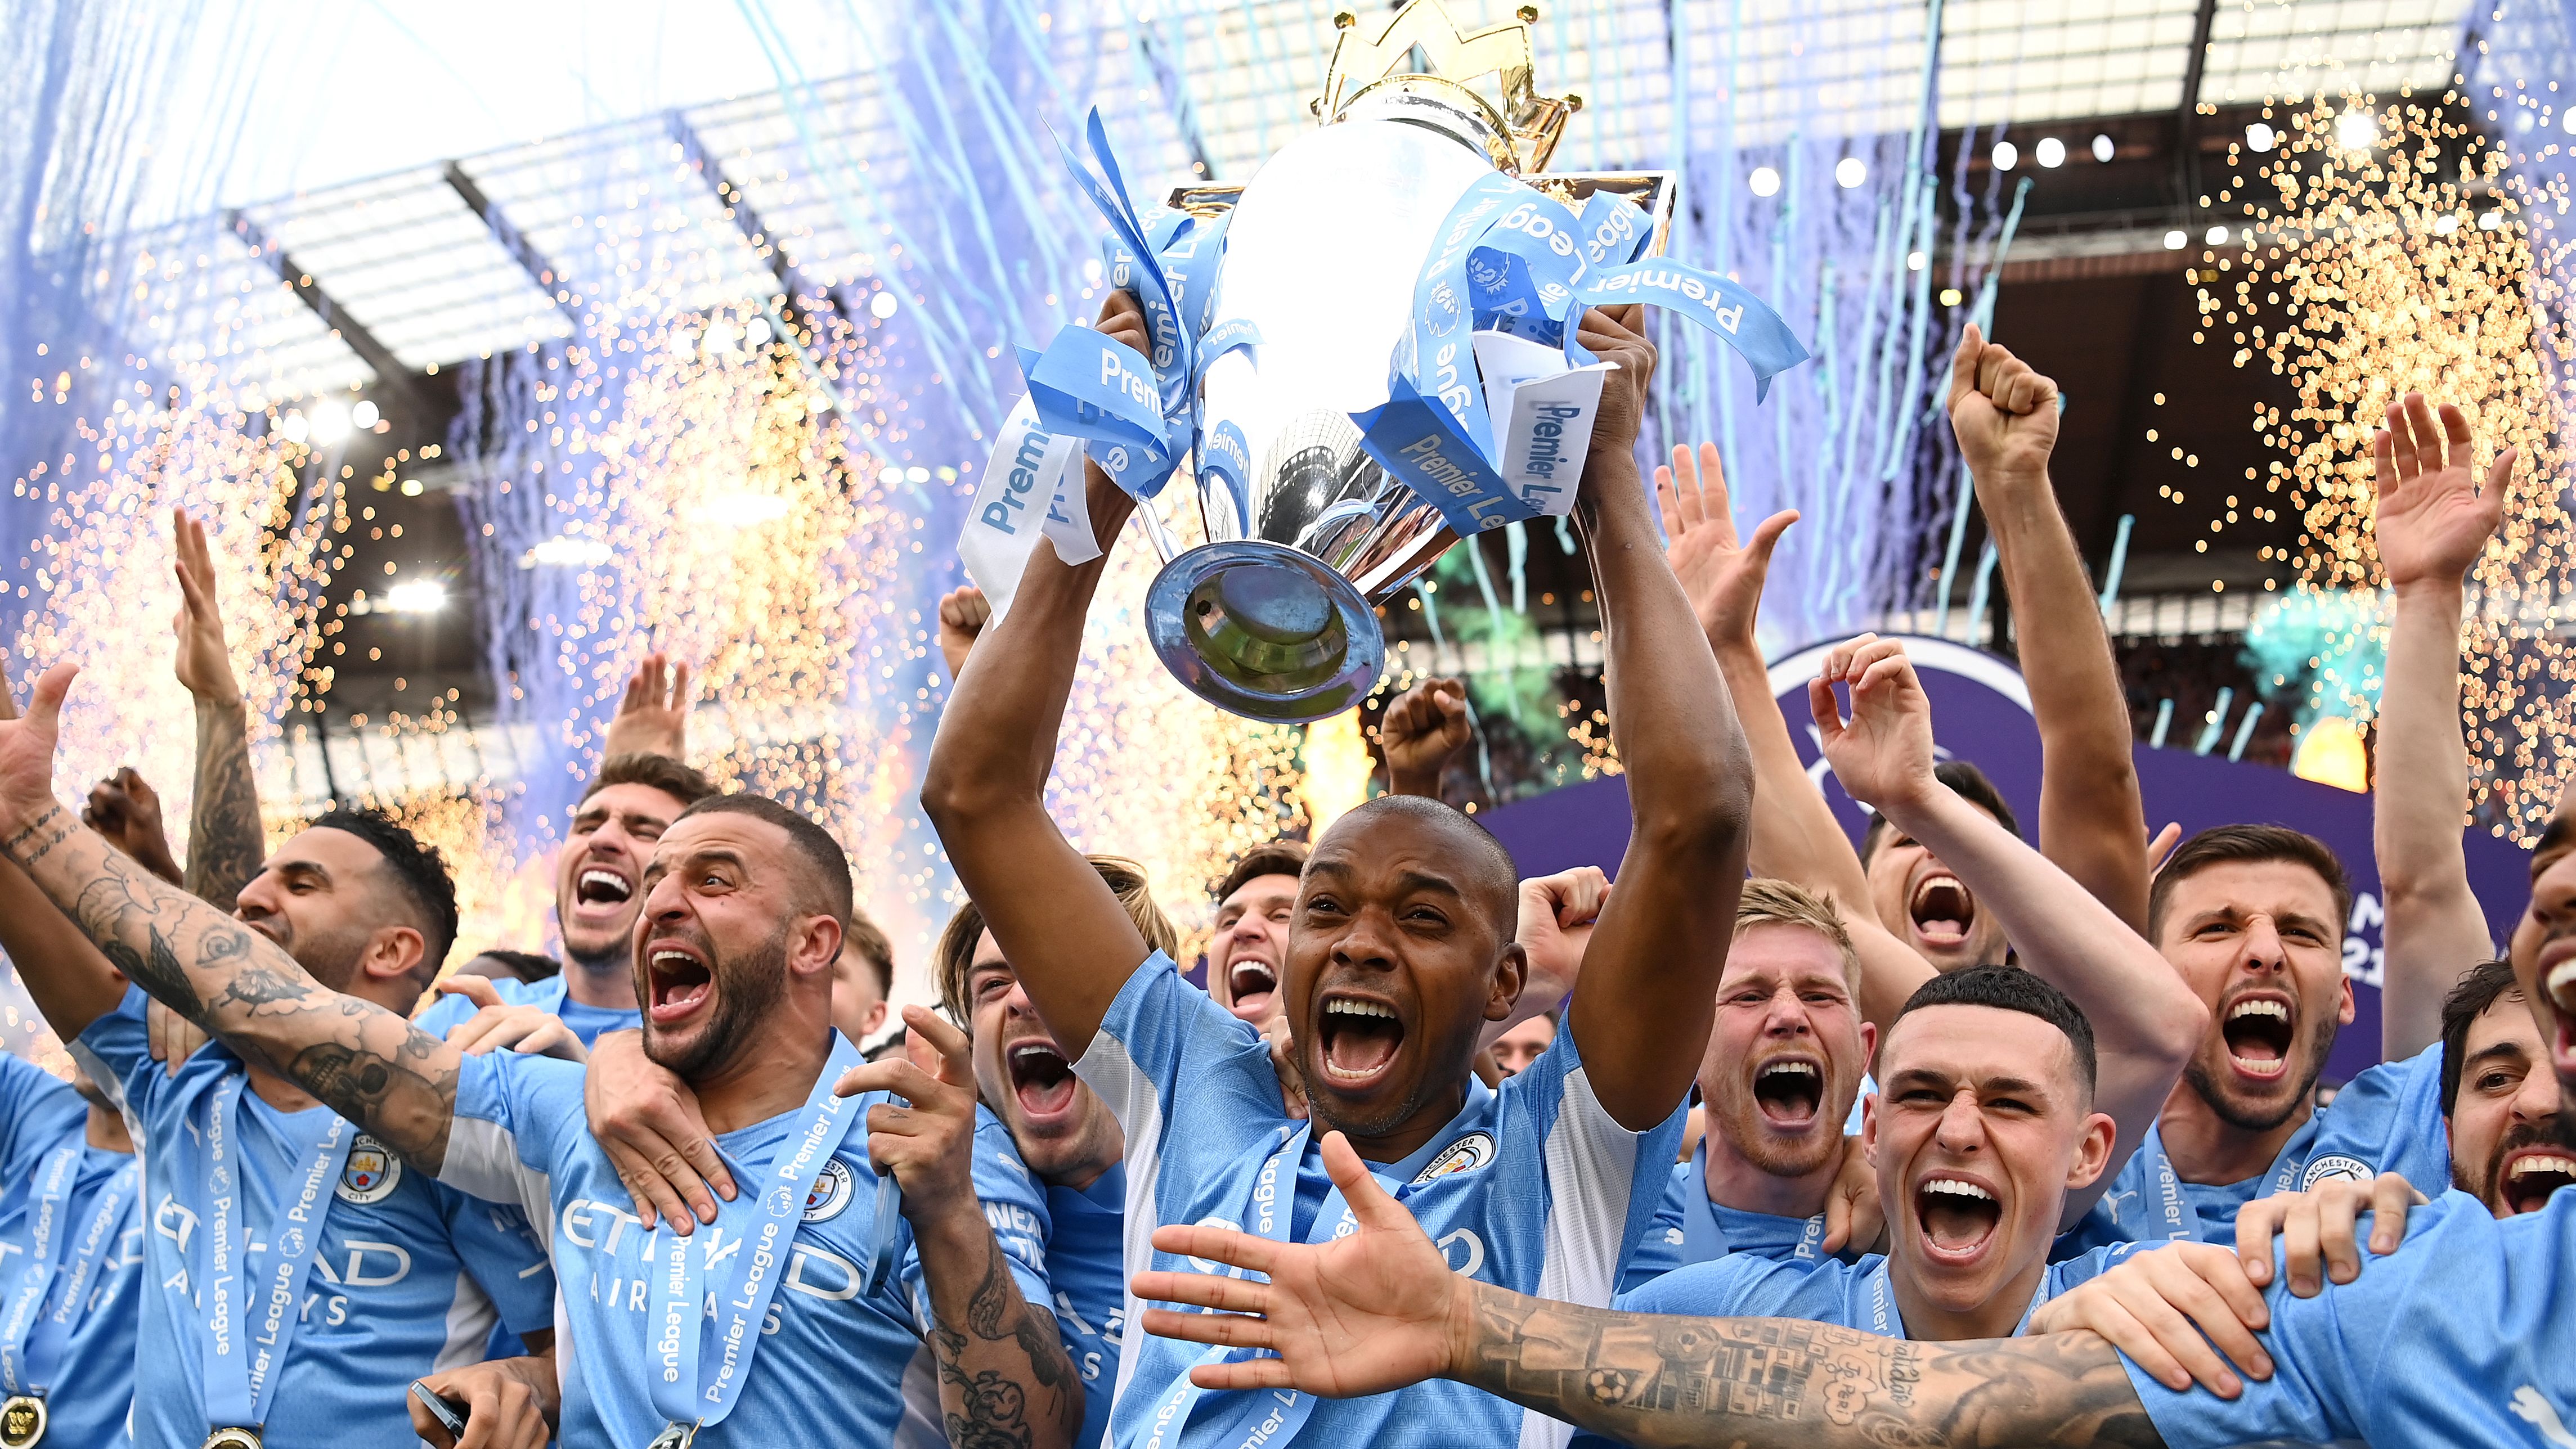 Premier League: Manchester City produces stunning comeback to secure title on dramatic final day